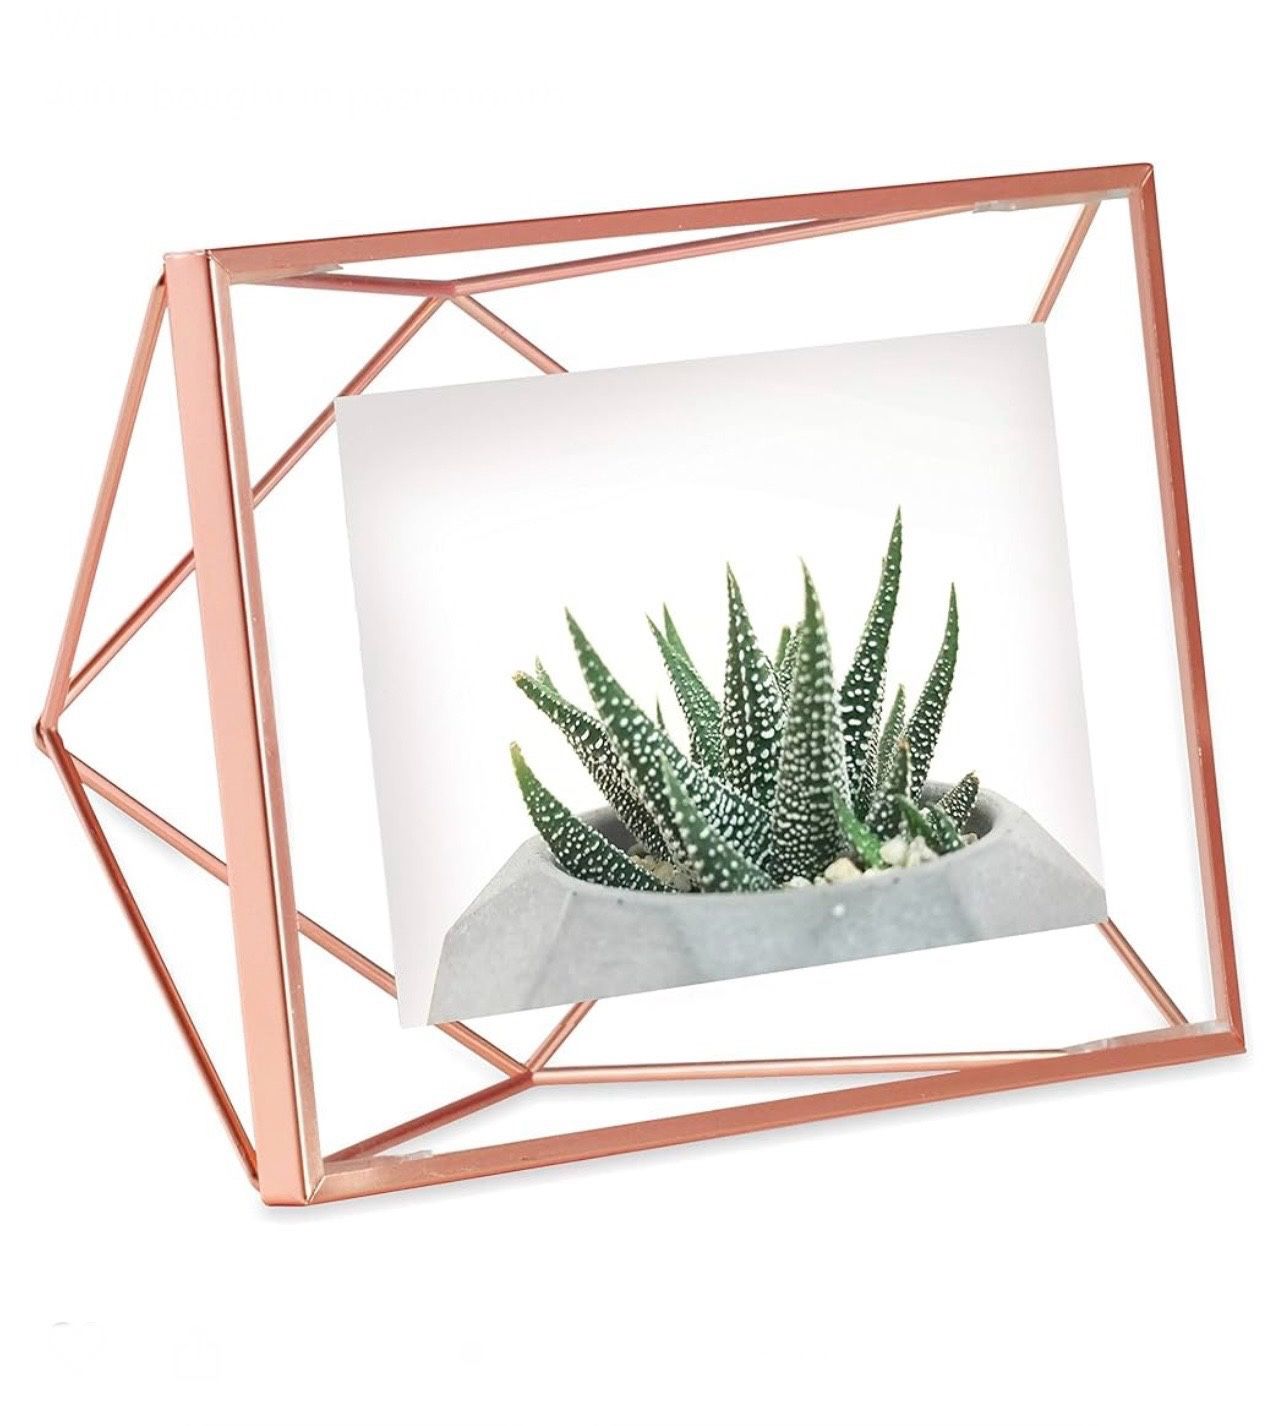 Prism Picture Frame 4 x 6 Photo Display for Desk or Wall Copper